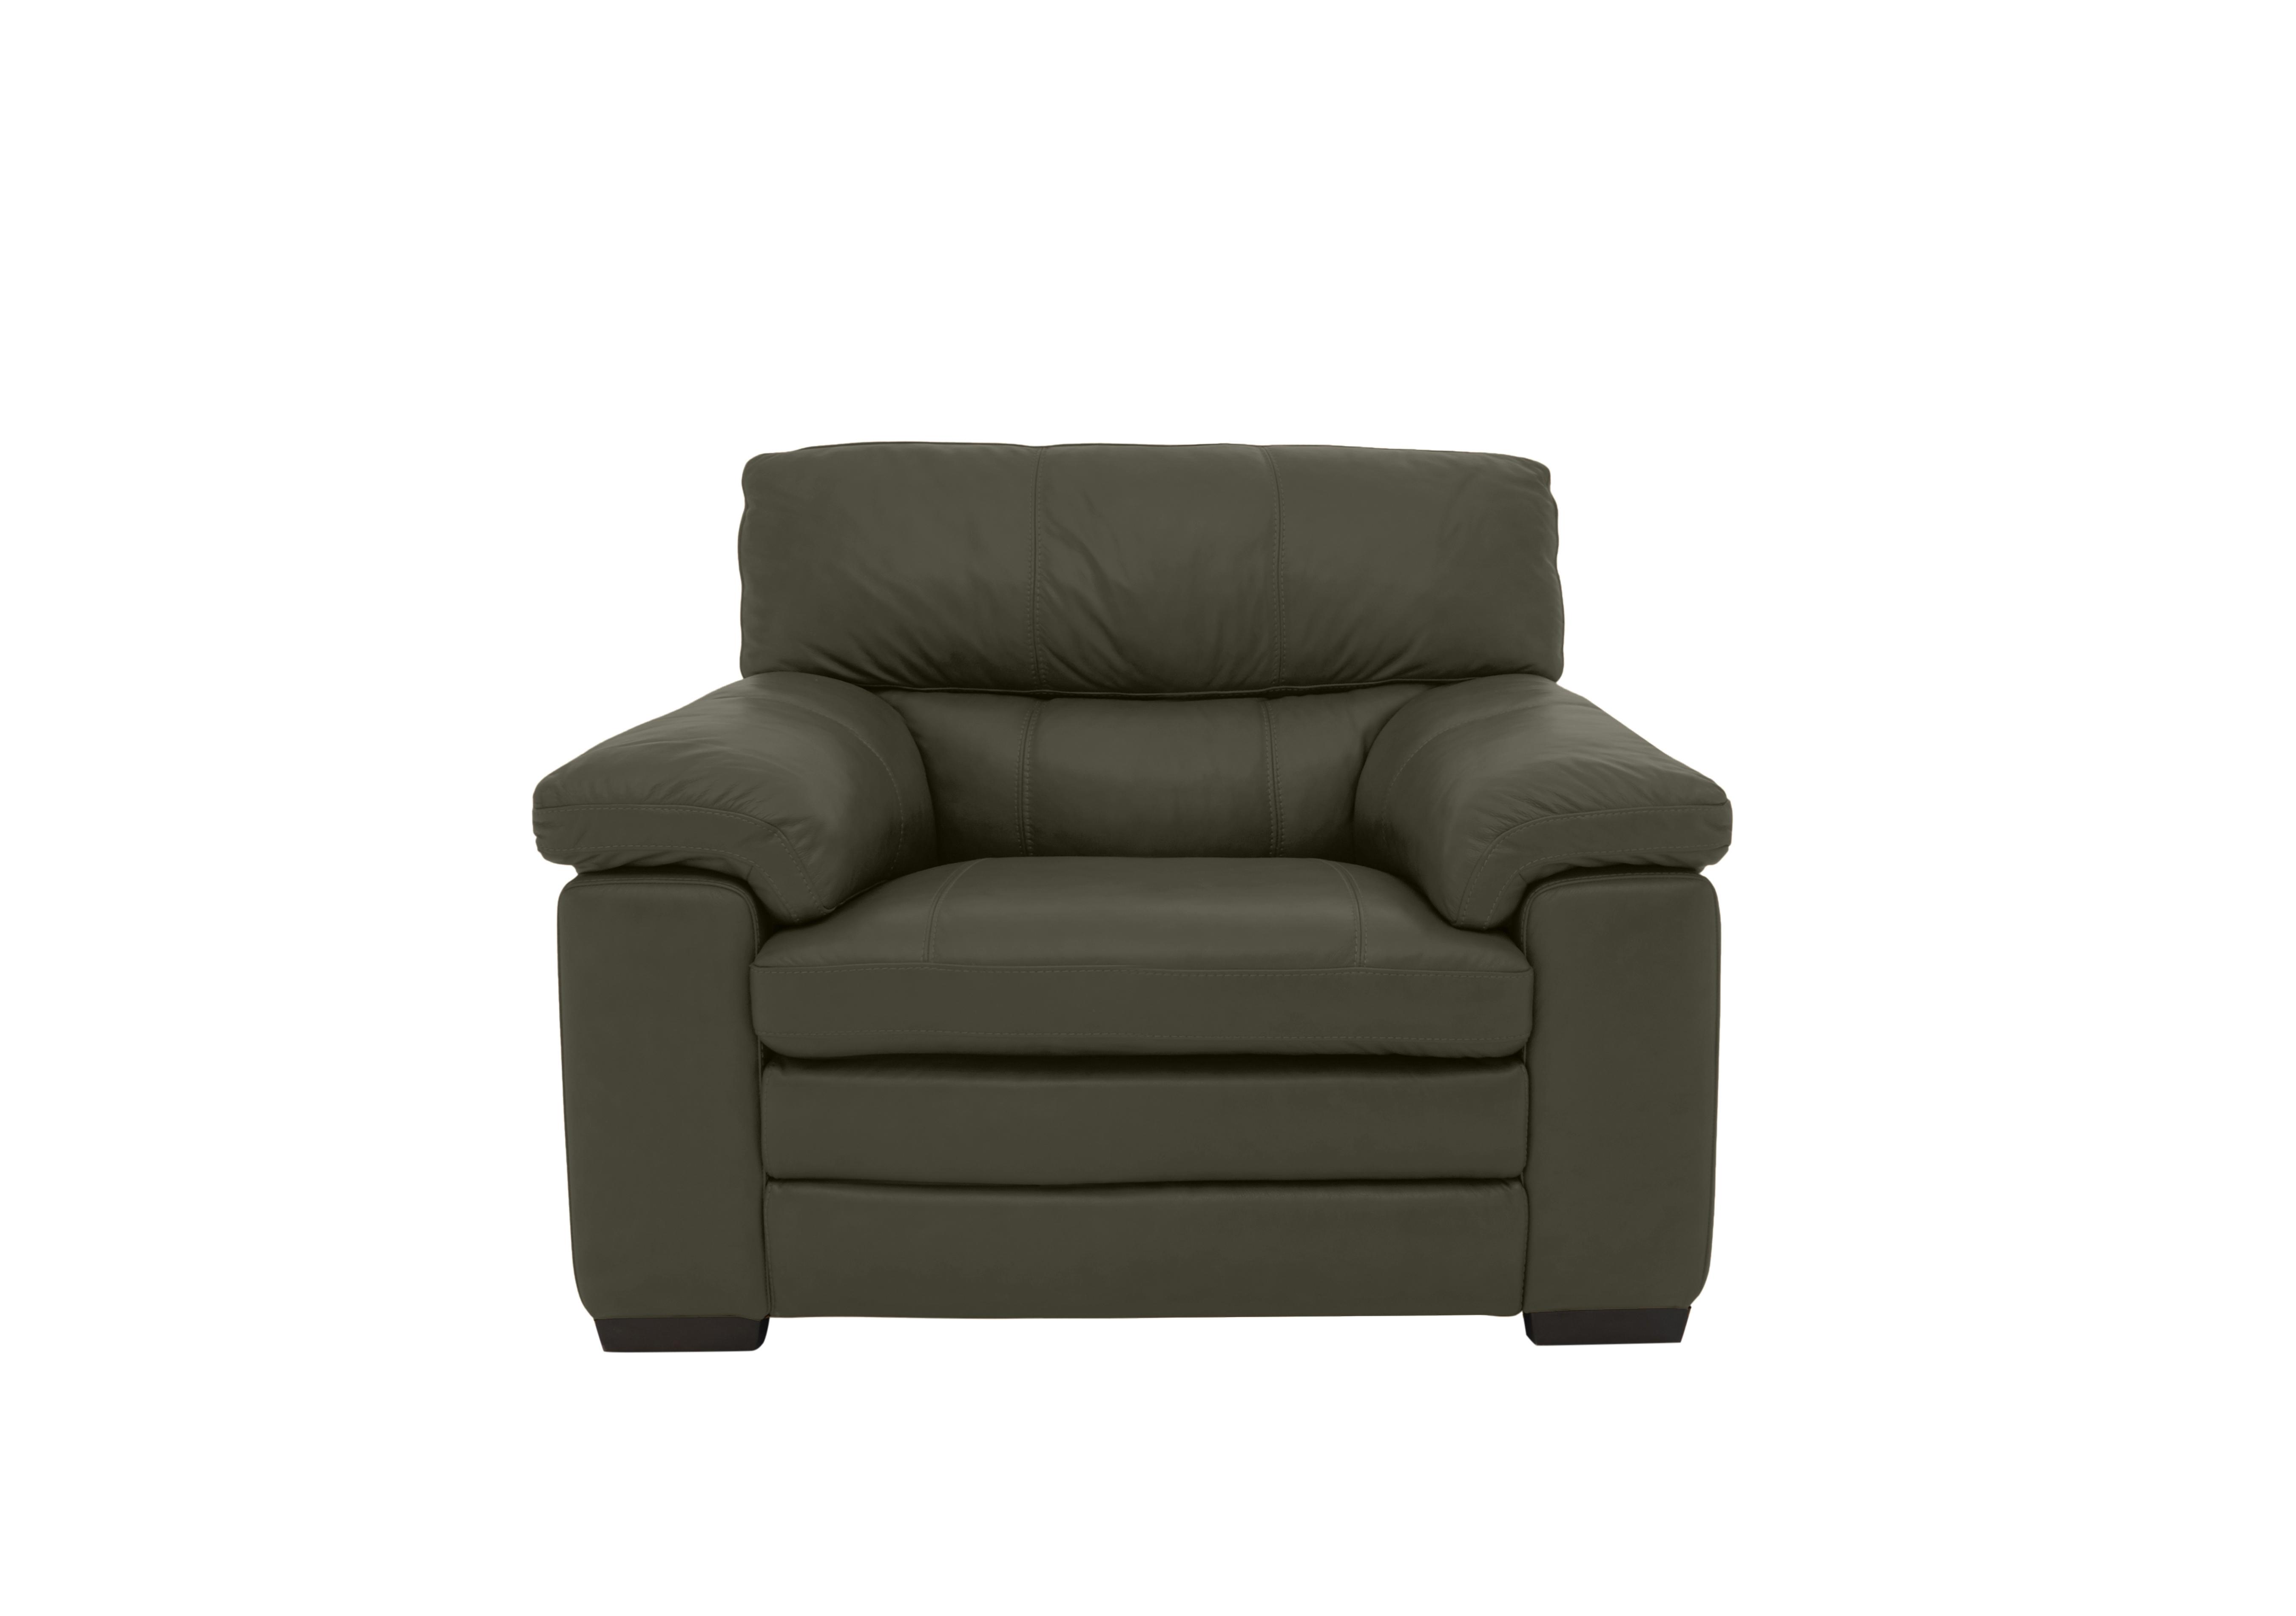 Cozee Leather Armchair in Nw-548e Olive on Furniture Village